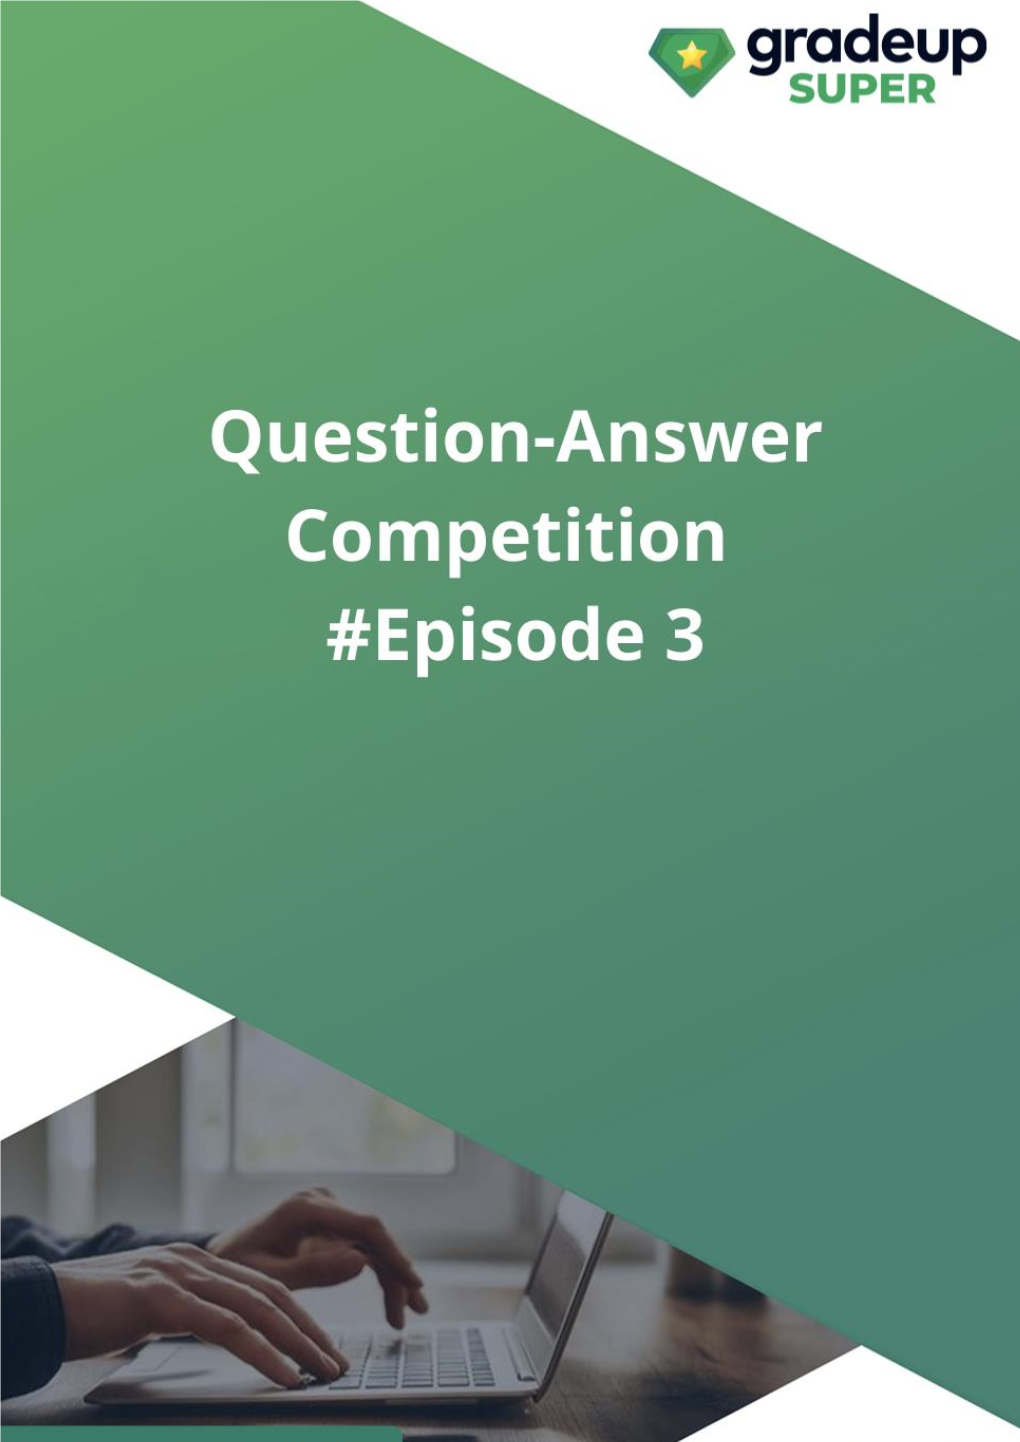 Question-Answer Competition PDF of Episode 3